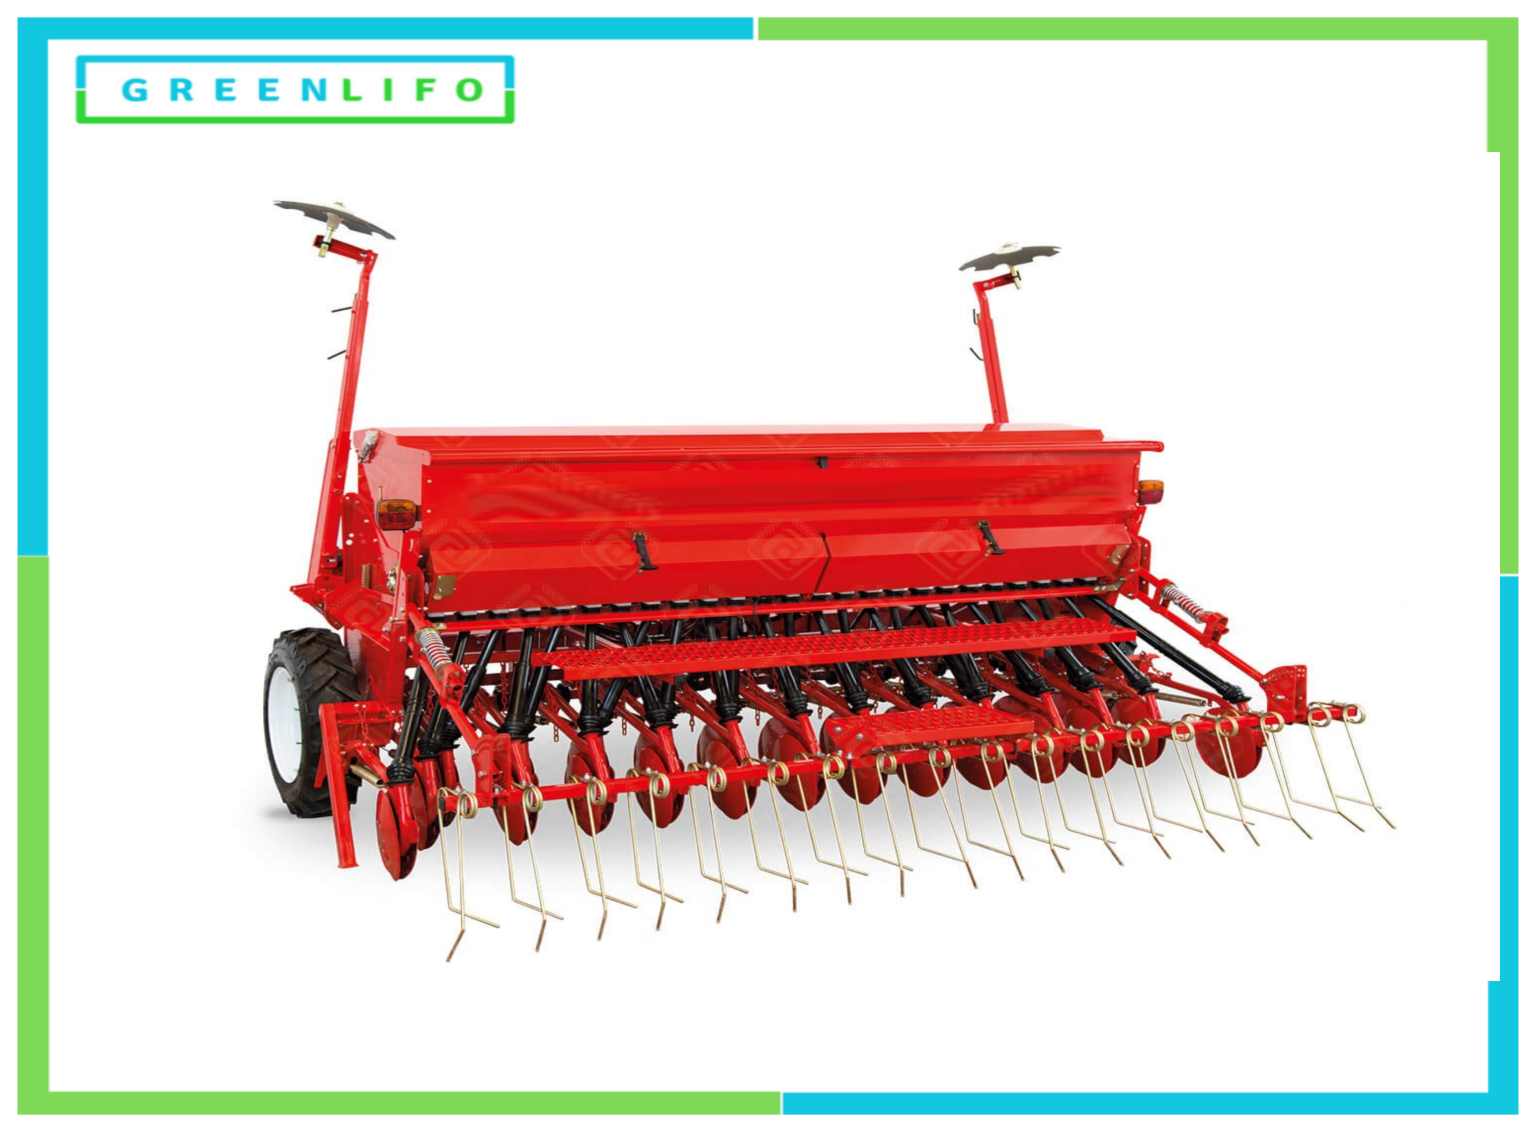 Seed drill farm tools and equipment